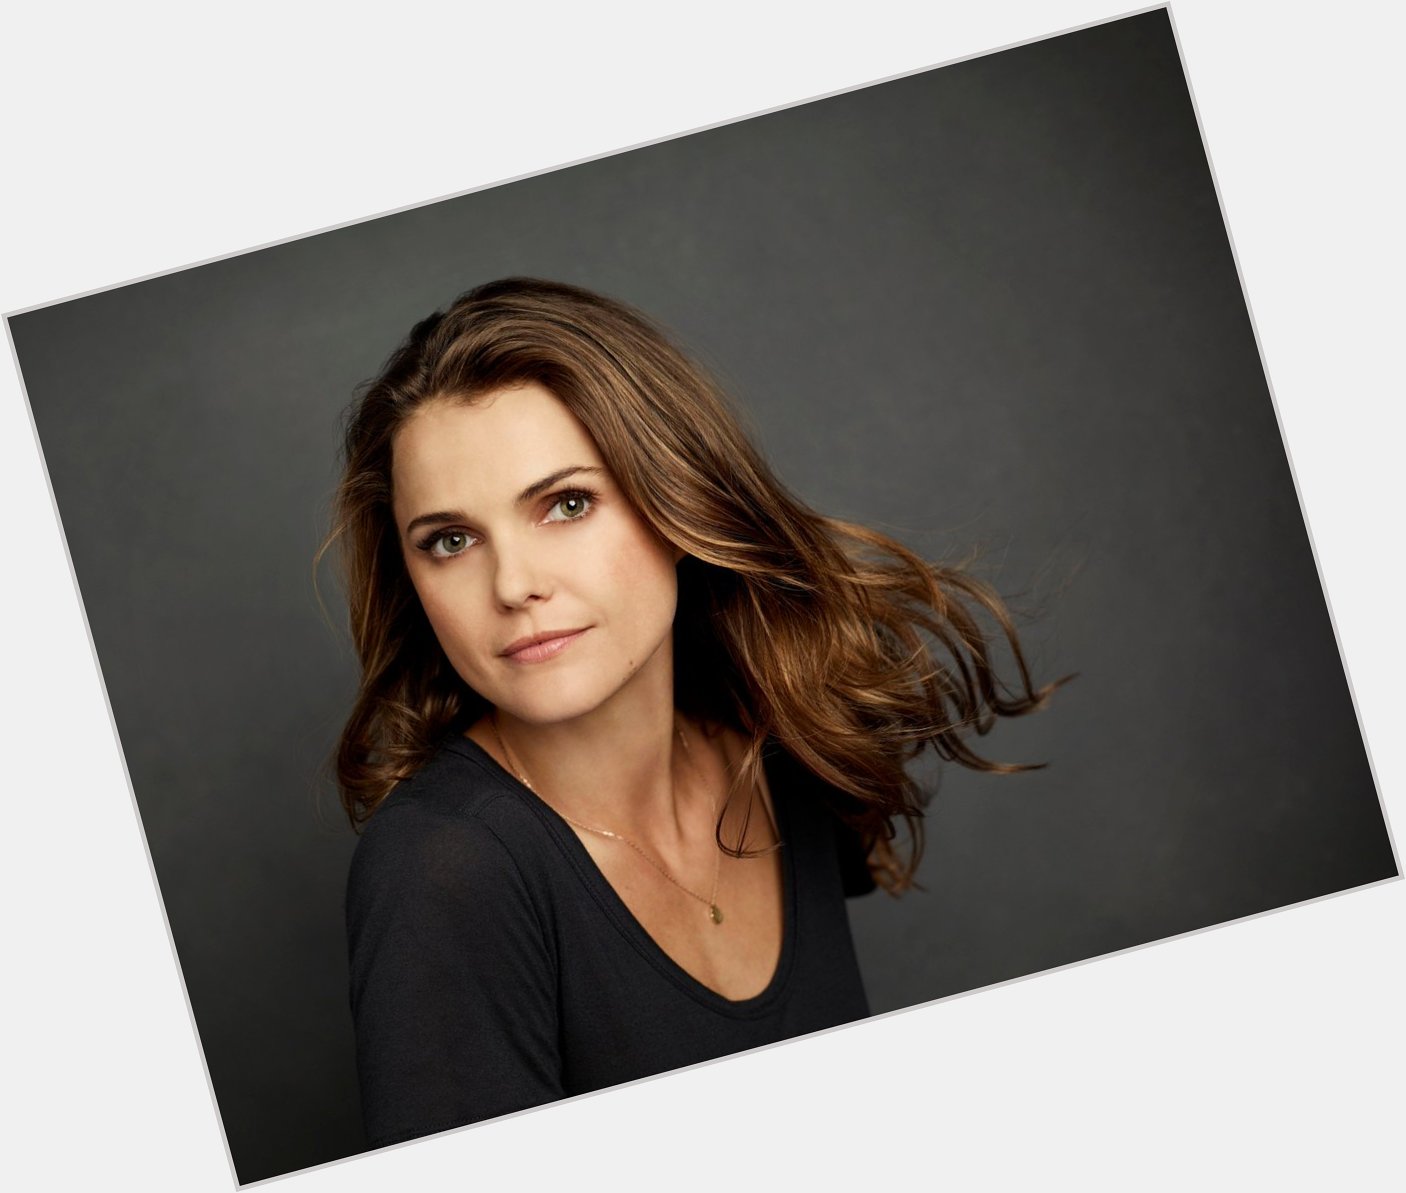 Happy Birthday to Keri Russell, who turns 41 today! 